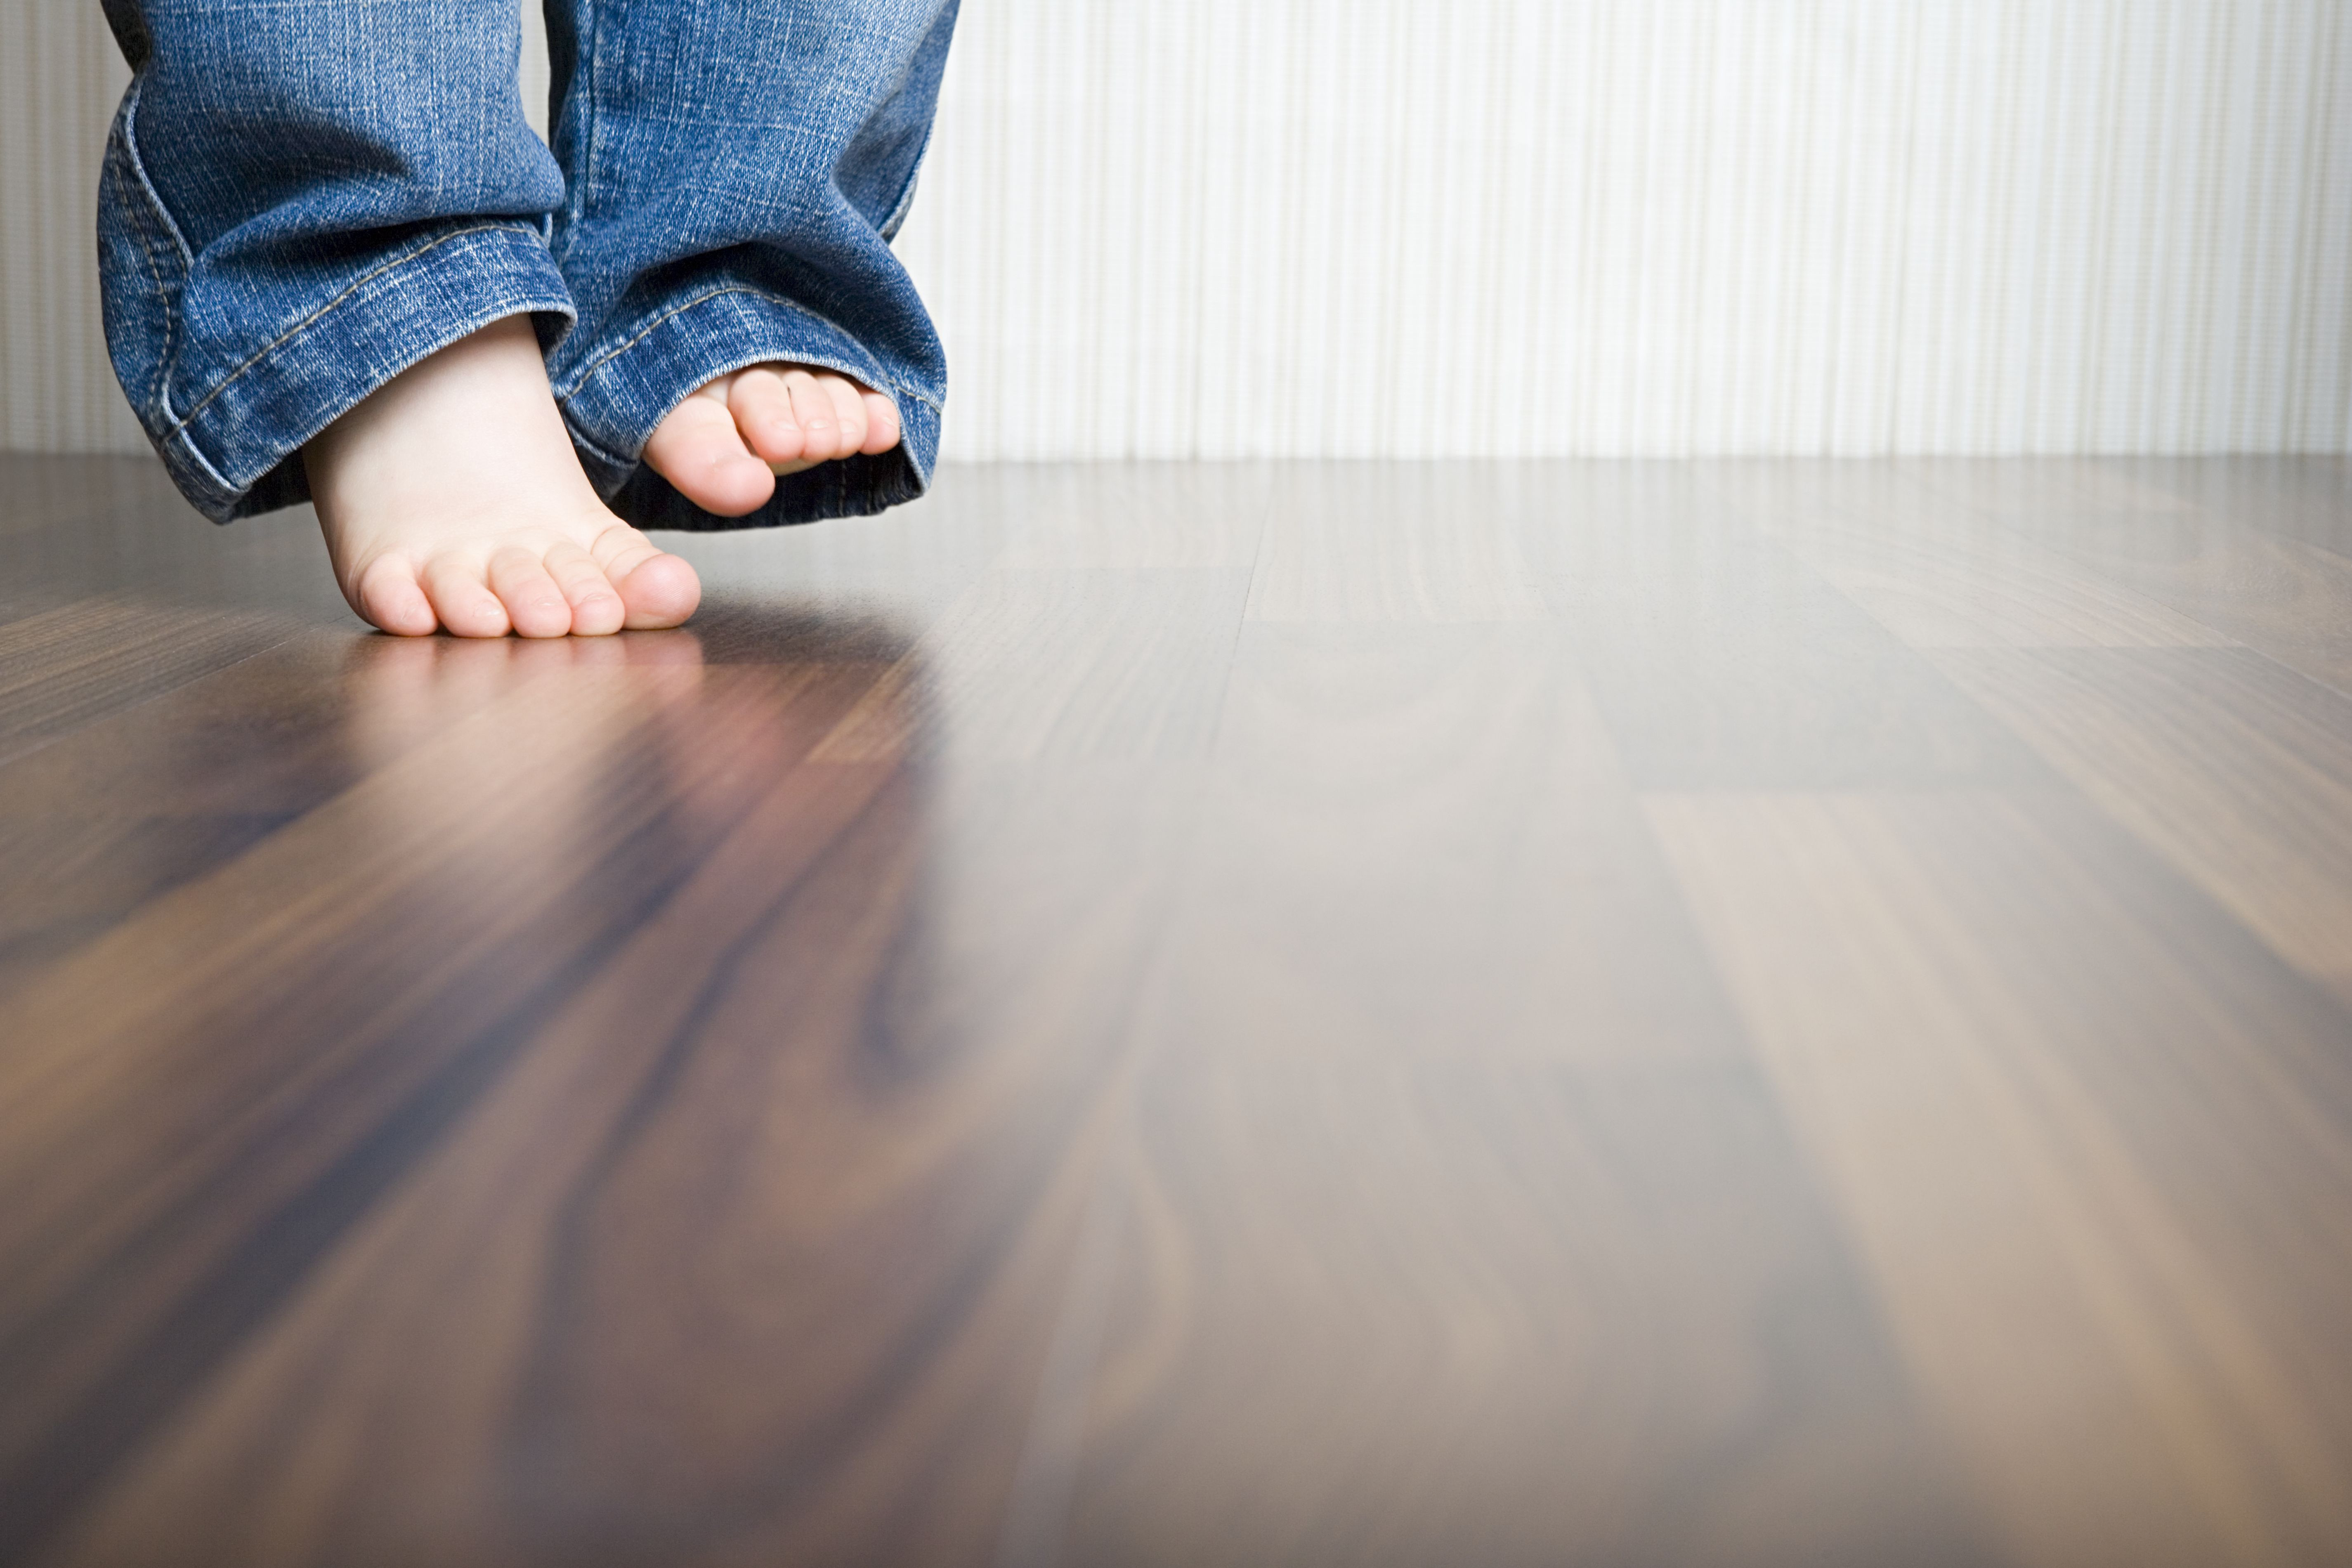 bona professional hardwood floor care system of how to clean hardwood floors best way to clean wood flooring within 1512149908 gettyimages 75403973